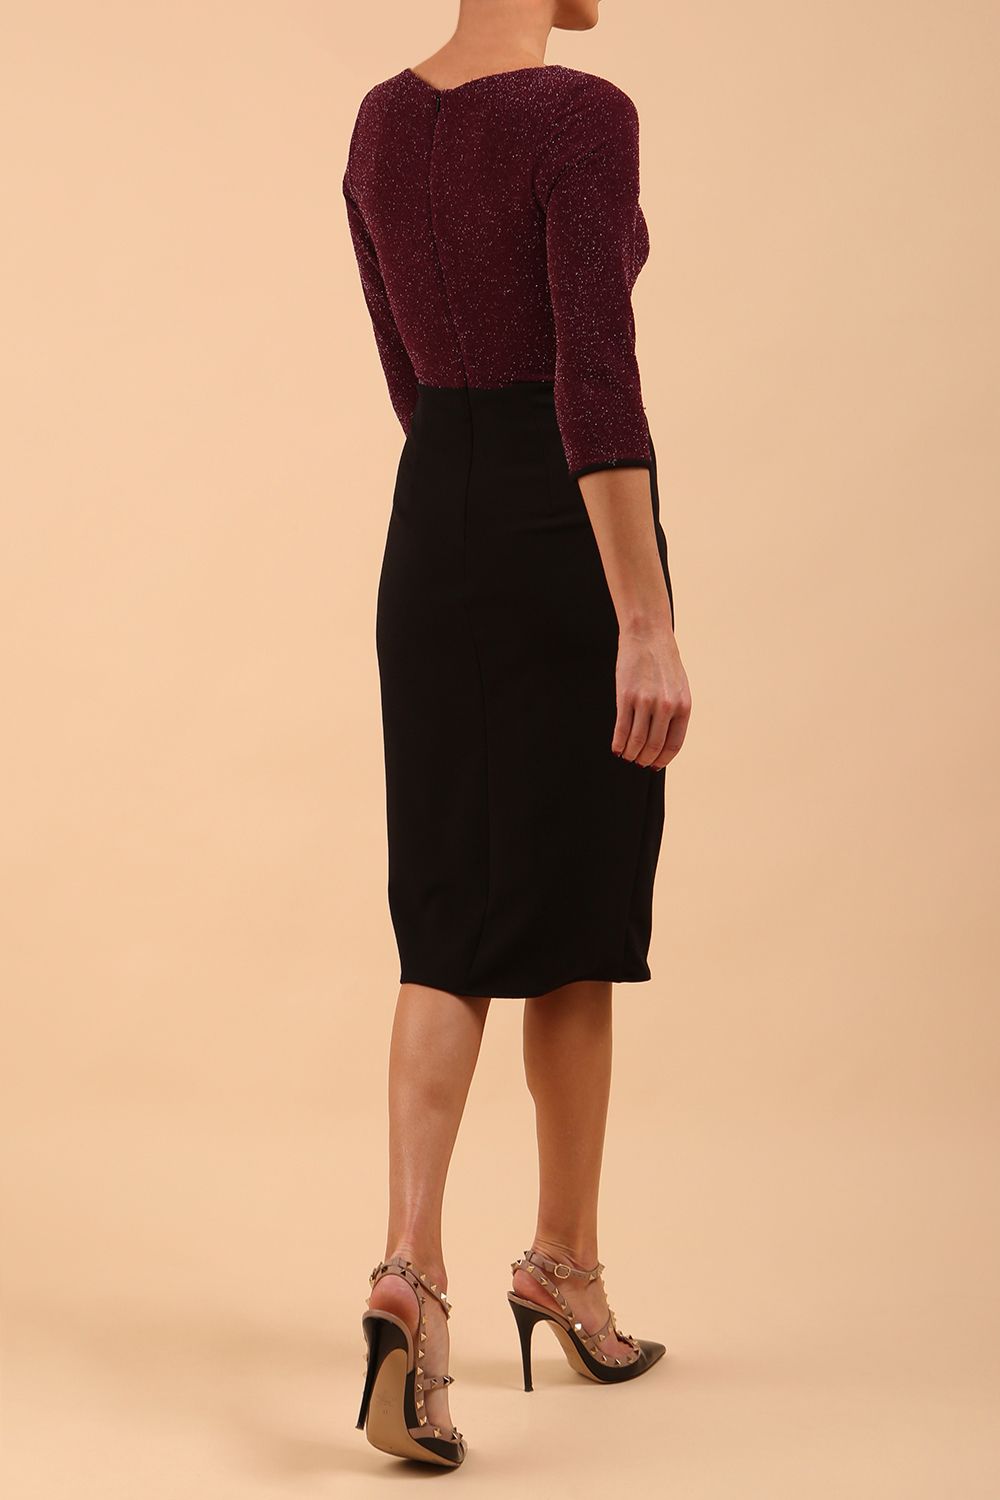 model is wearing diva catwalk contrast pencil dress with sleeve and asymmetric skirt detail in black and burgundy sparkle back